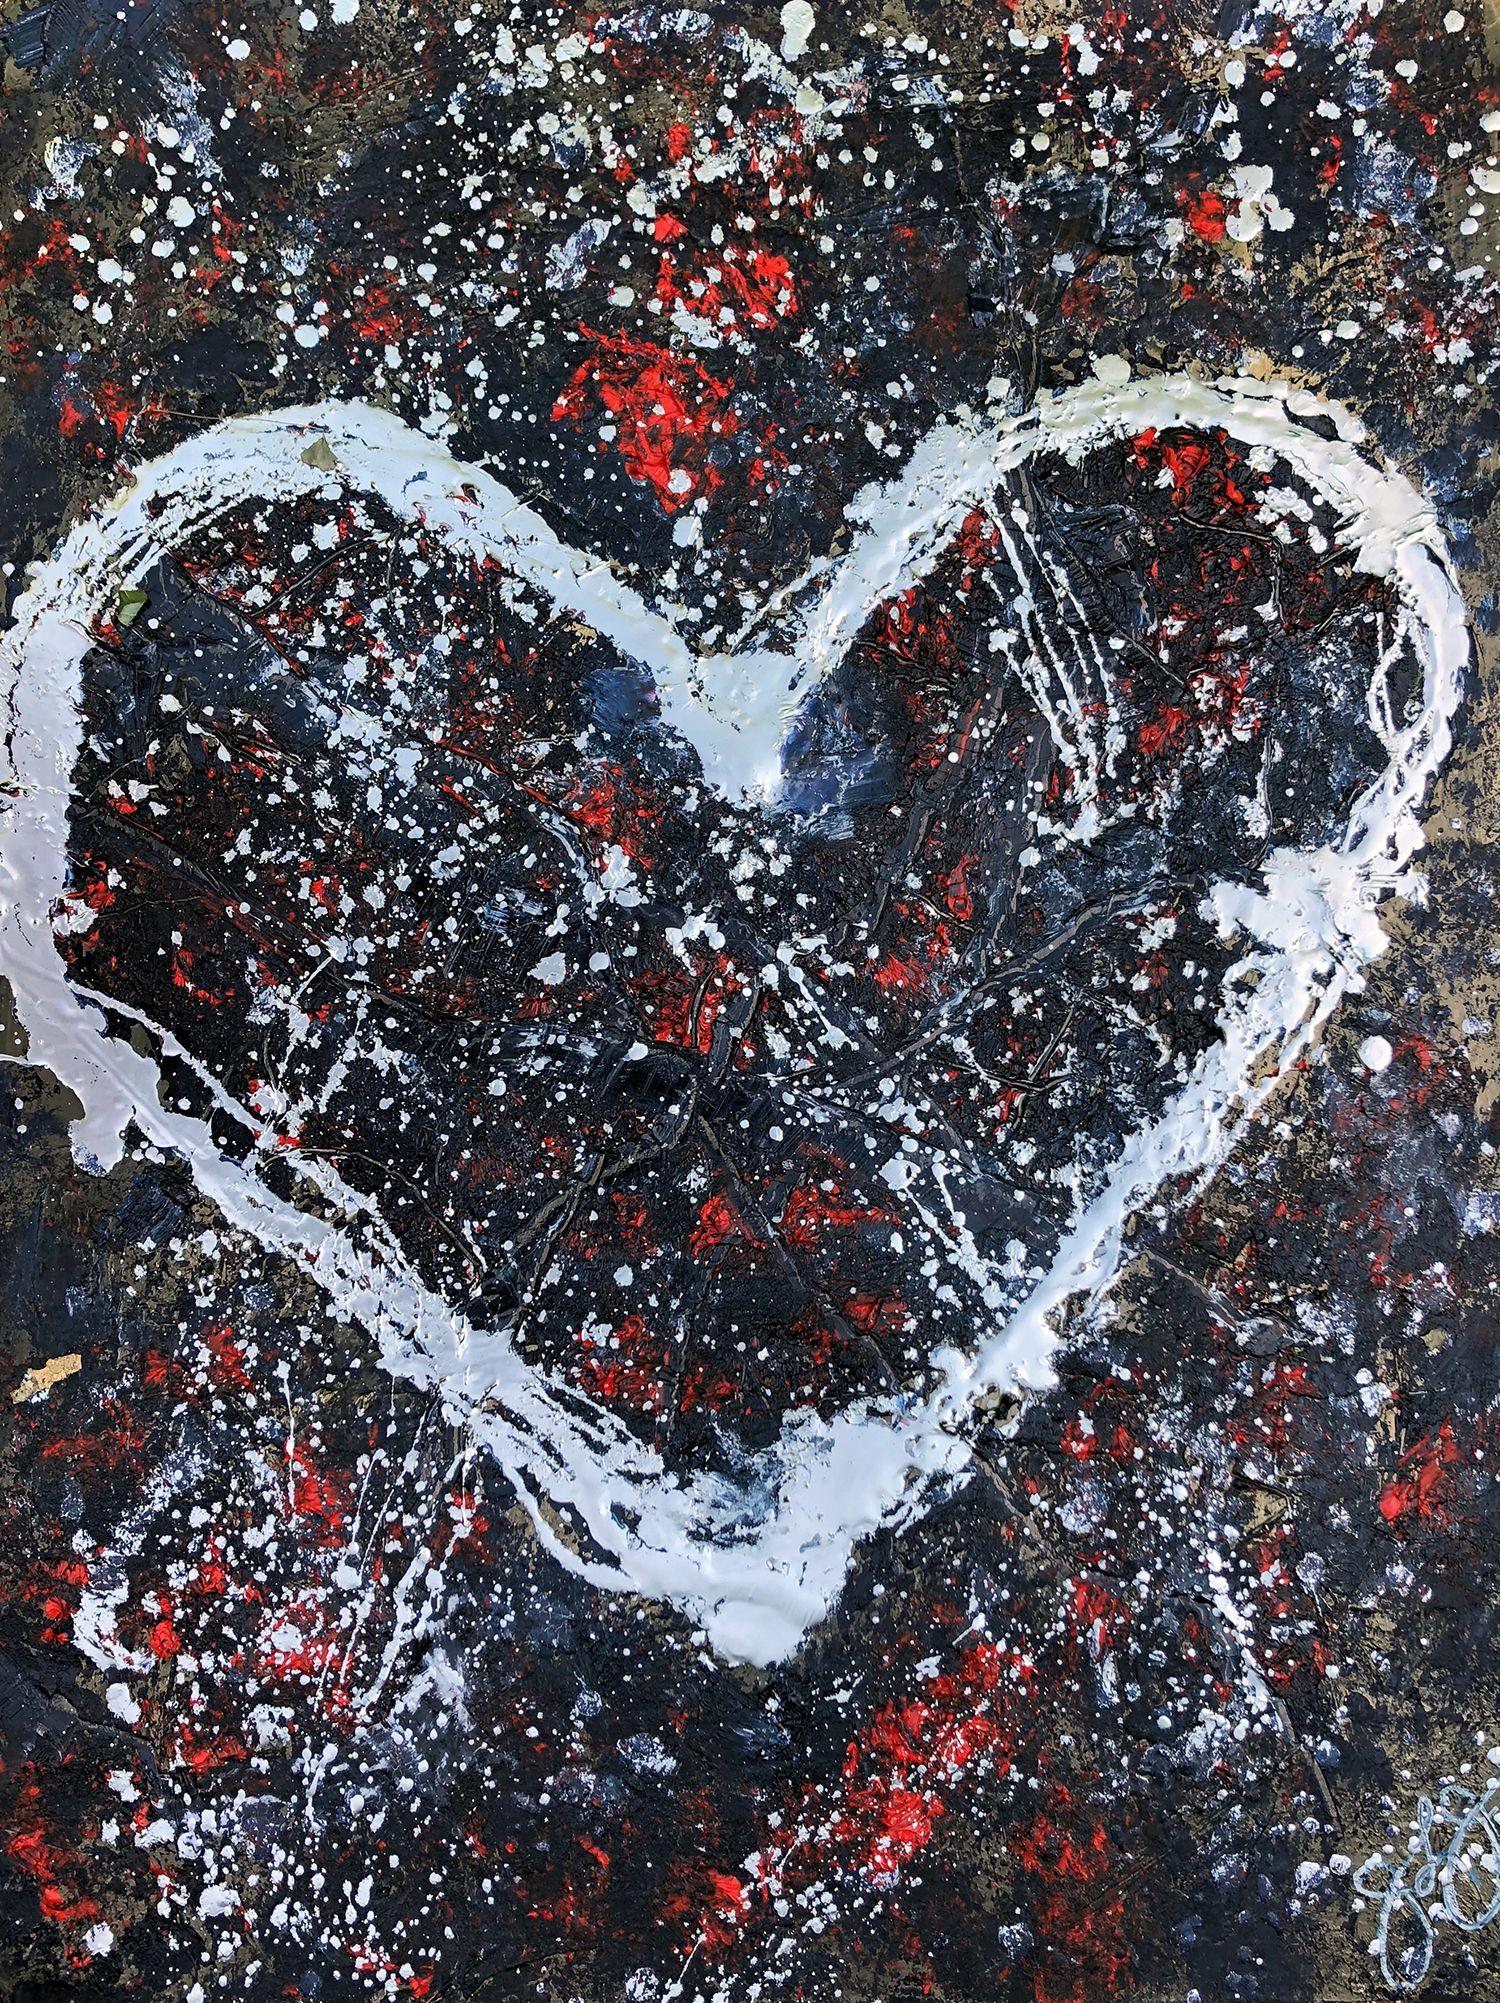 essen's heart 23., Mixed Media on Paper - Mixed Media Art by Jason Lincoln Jeffers